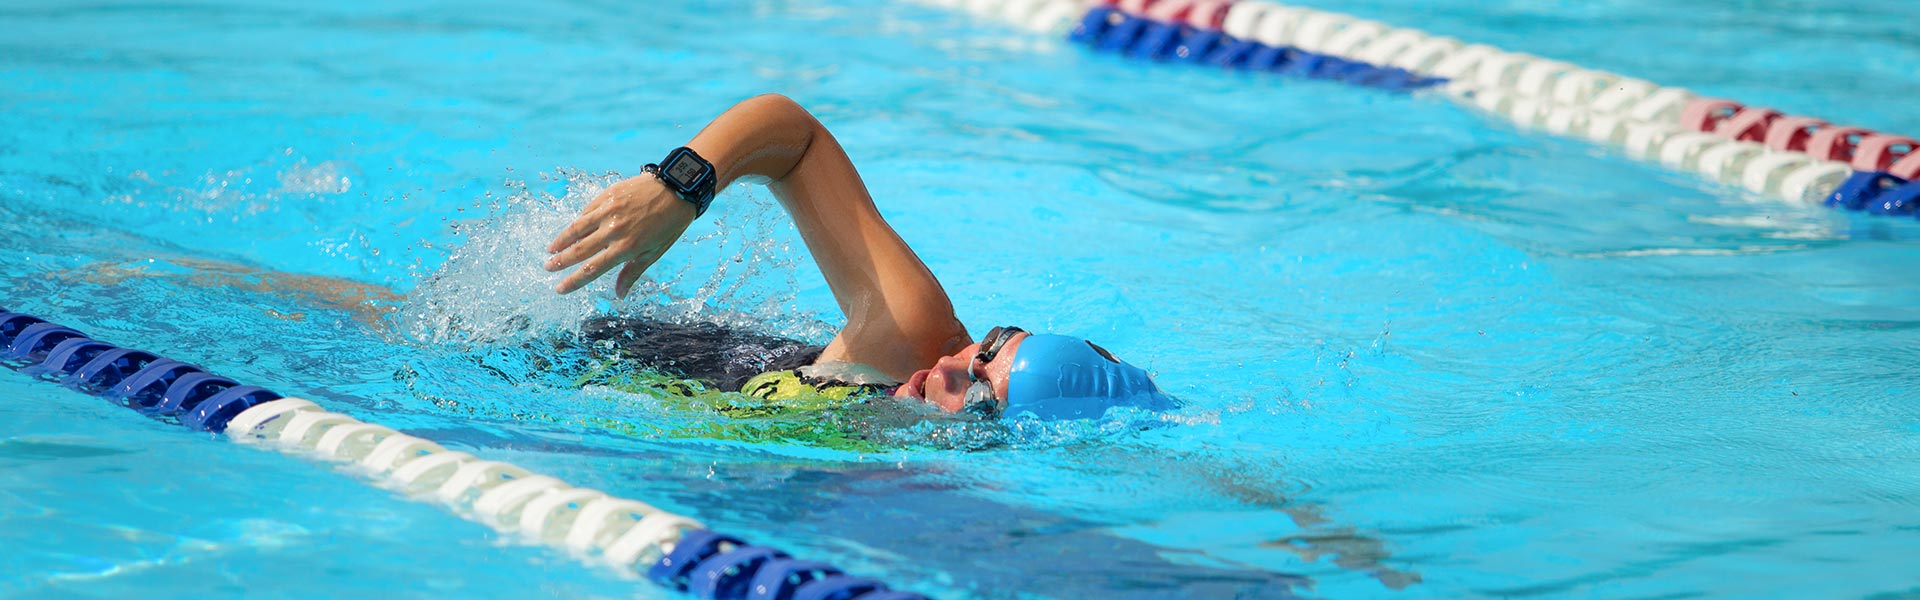 swimmer in a lap swimming pool